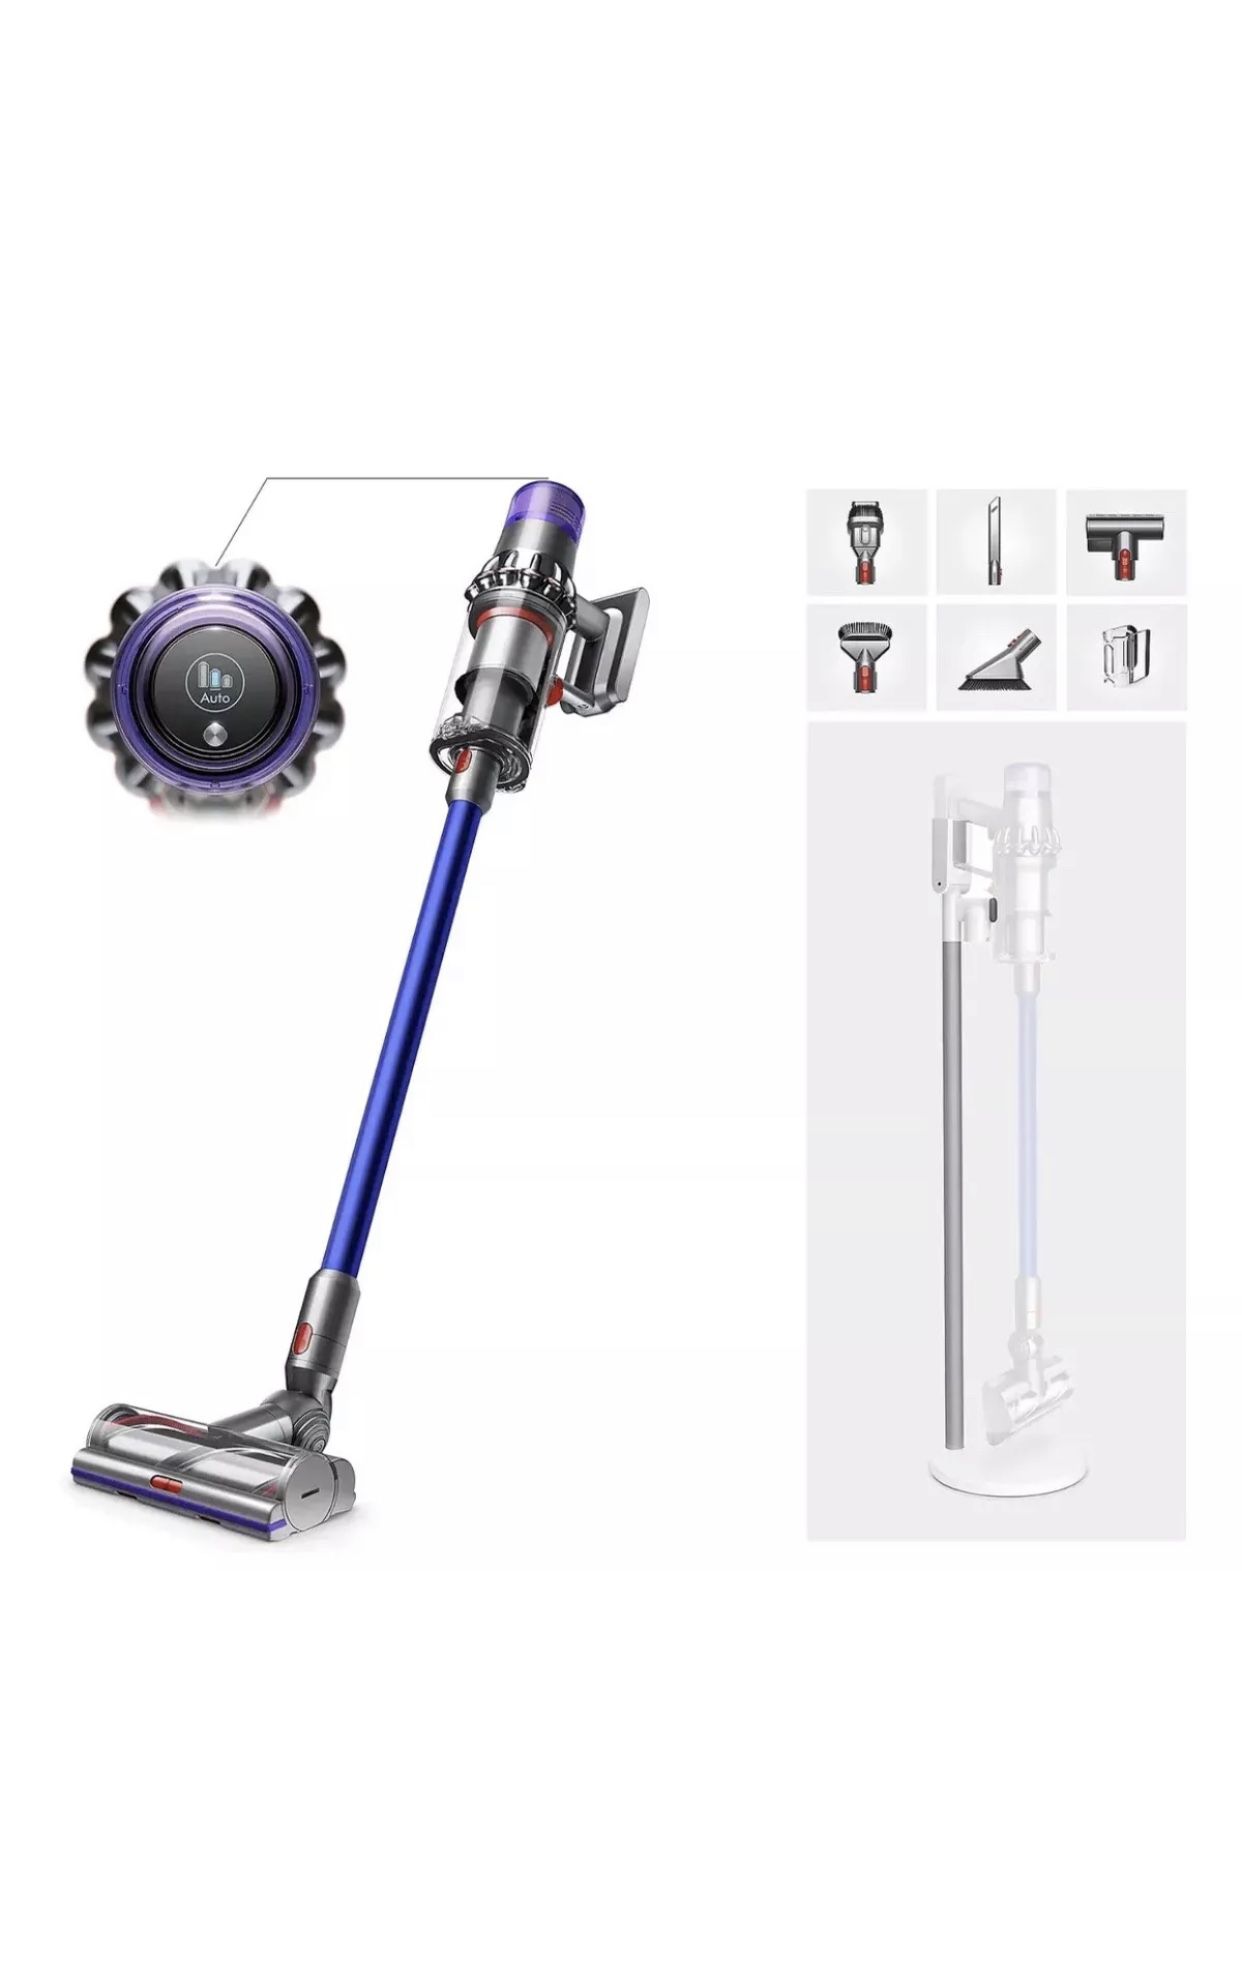 Dyson V11 Torque Drive Cordless Vacuum with Grab-and-Go Floor Dok - Iron Gray